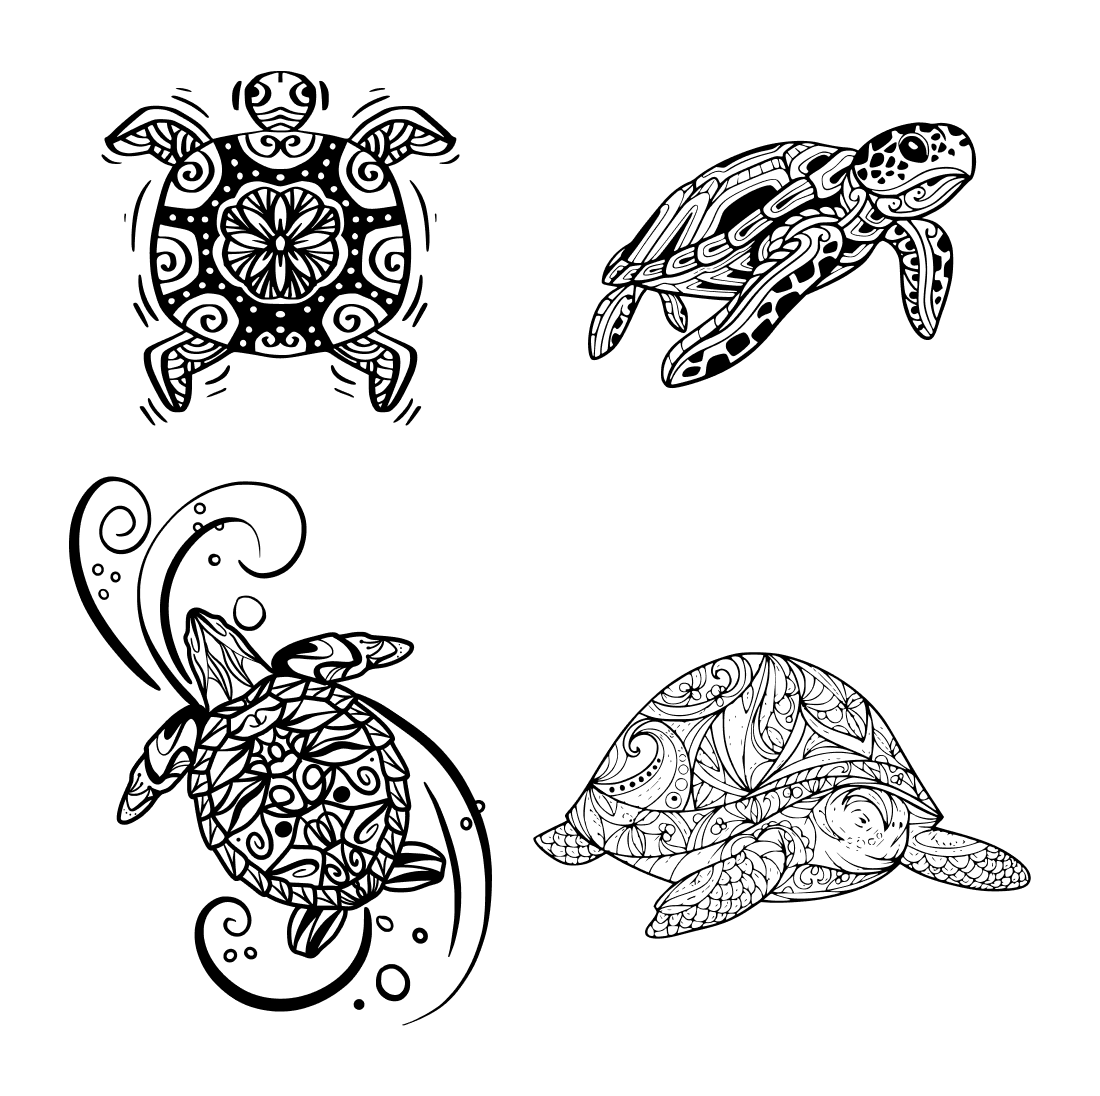 Four turtle designs in black and white on a white background.